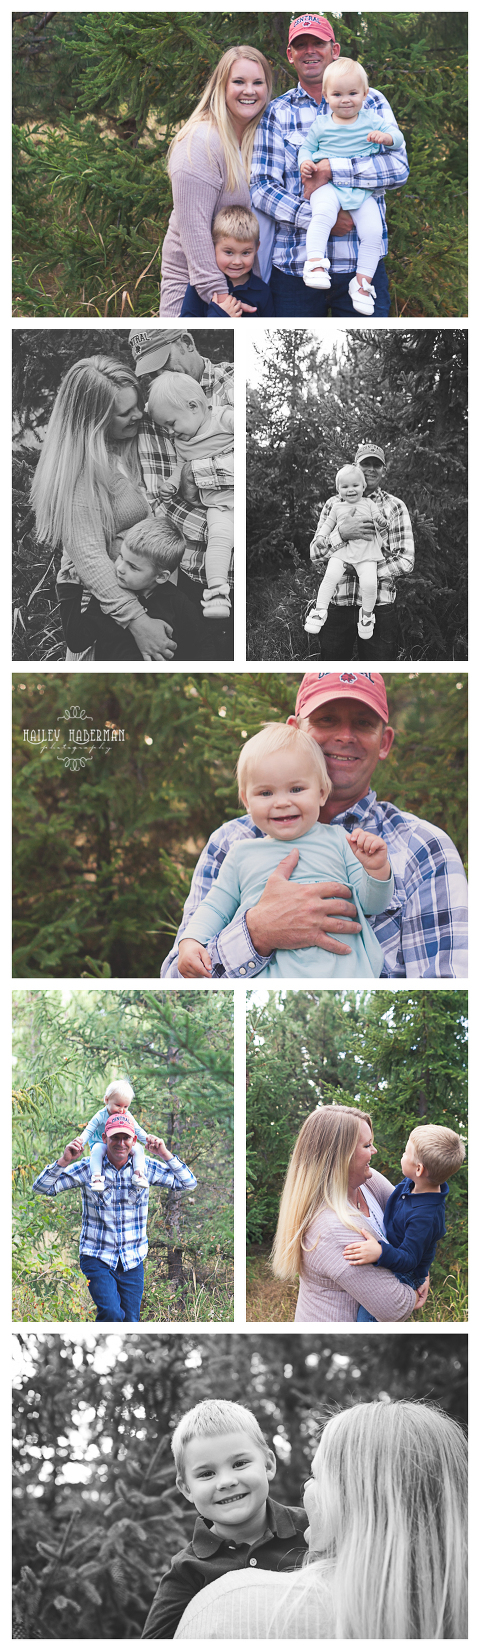 Fowler Lifestyle Family Session by Hailey Haberman in Ellensburg WA